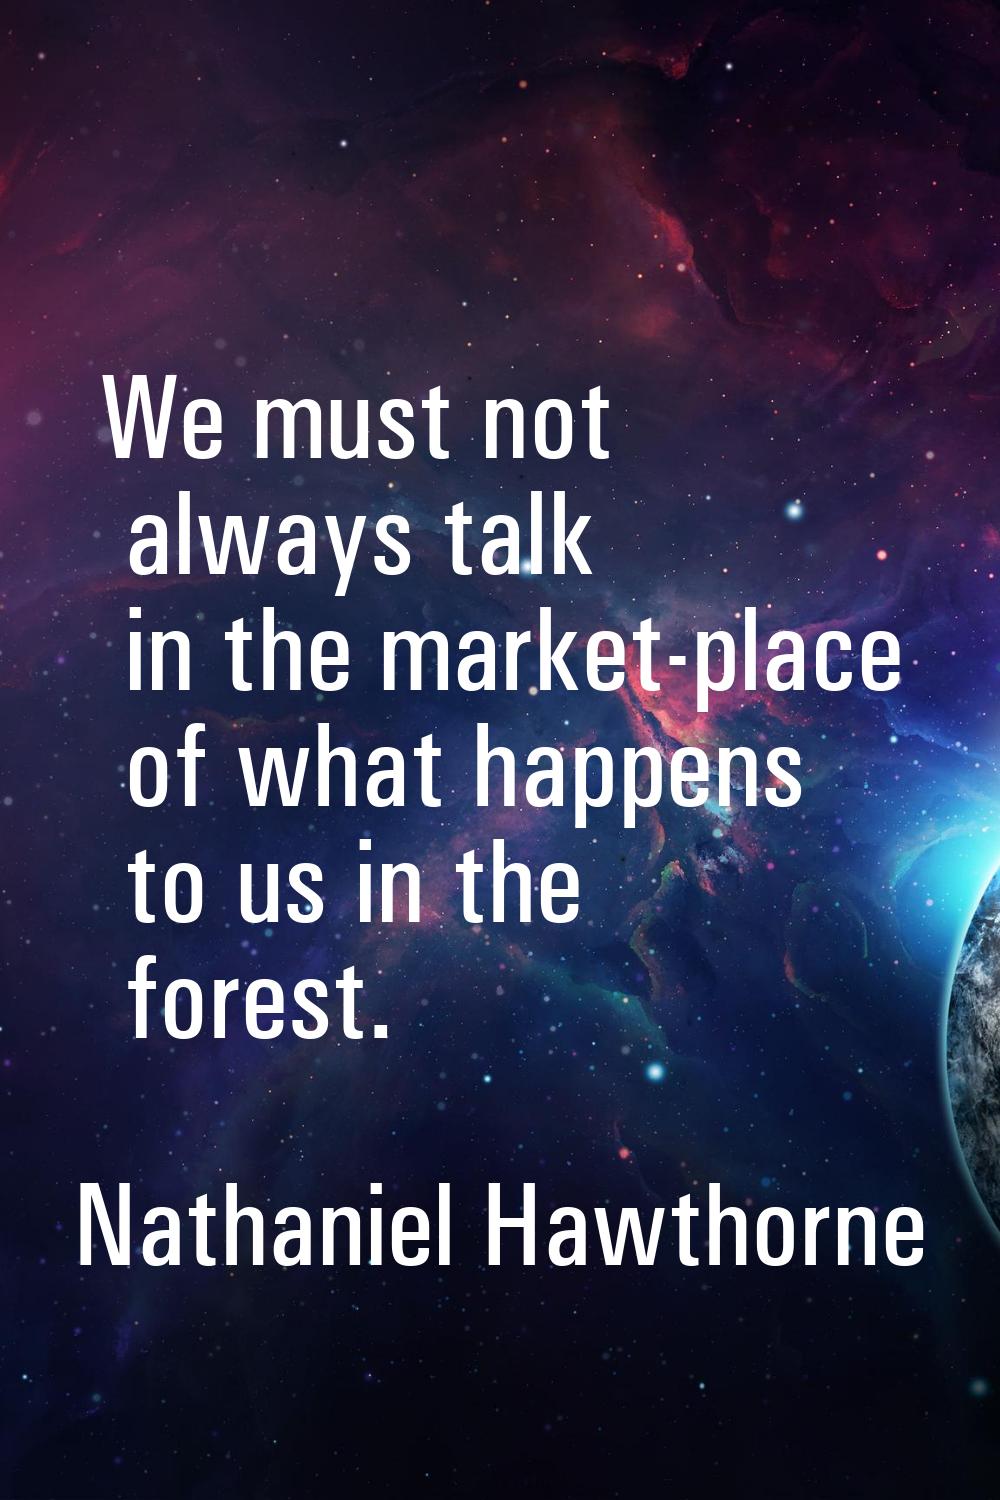 We must not always talk in the market-place of what happens to us in the forest.